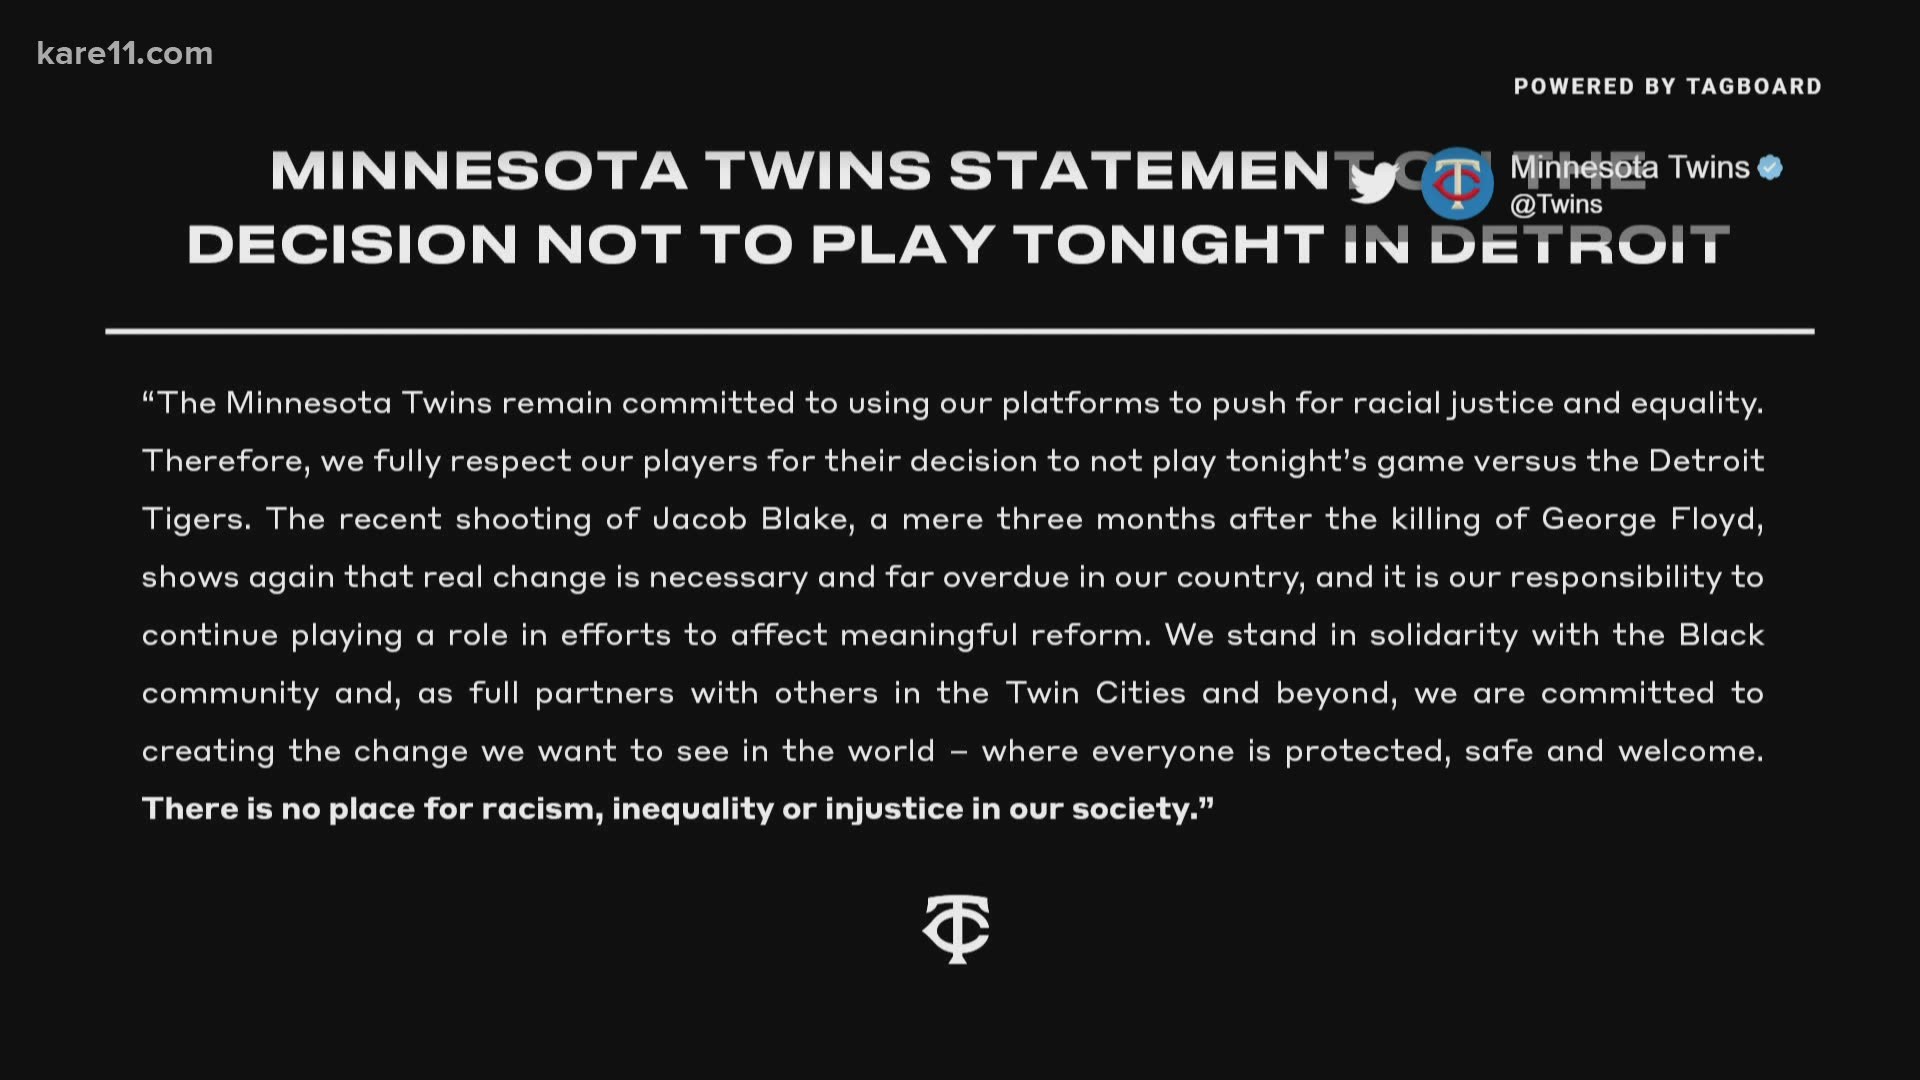 The Minnesota Twins joined several pro sports teams, including the Lynx, in postponing their games this week in support of protests for racial justice.